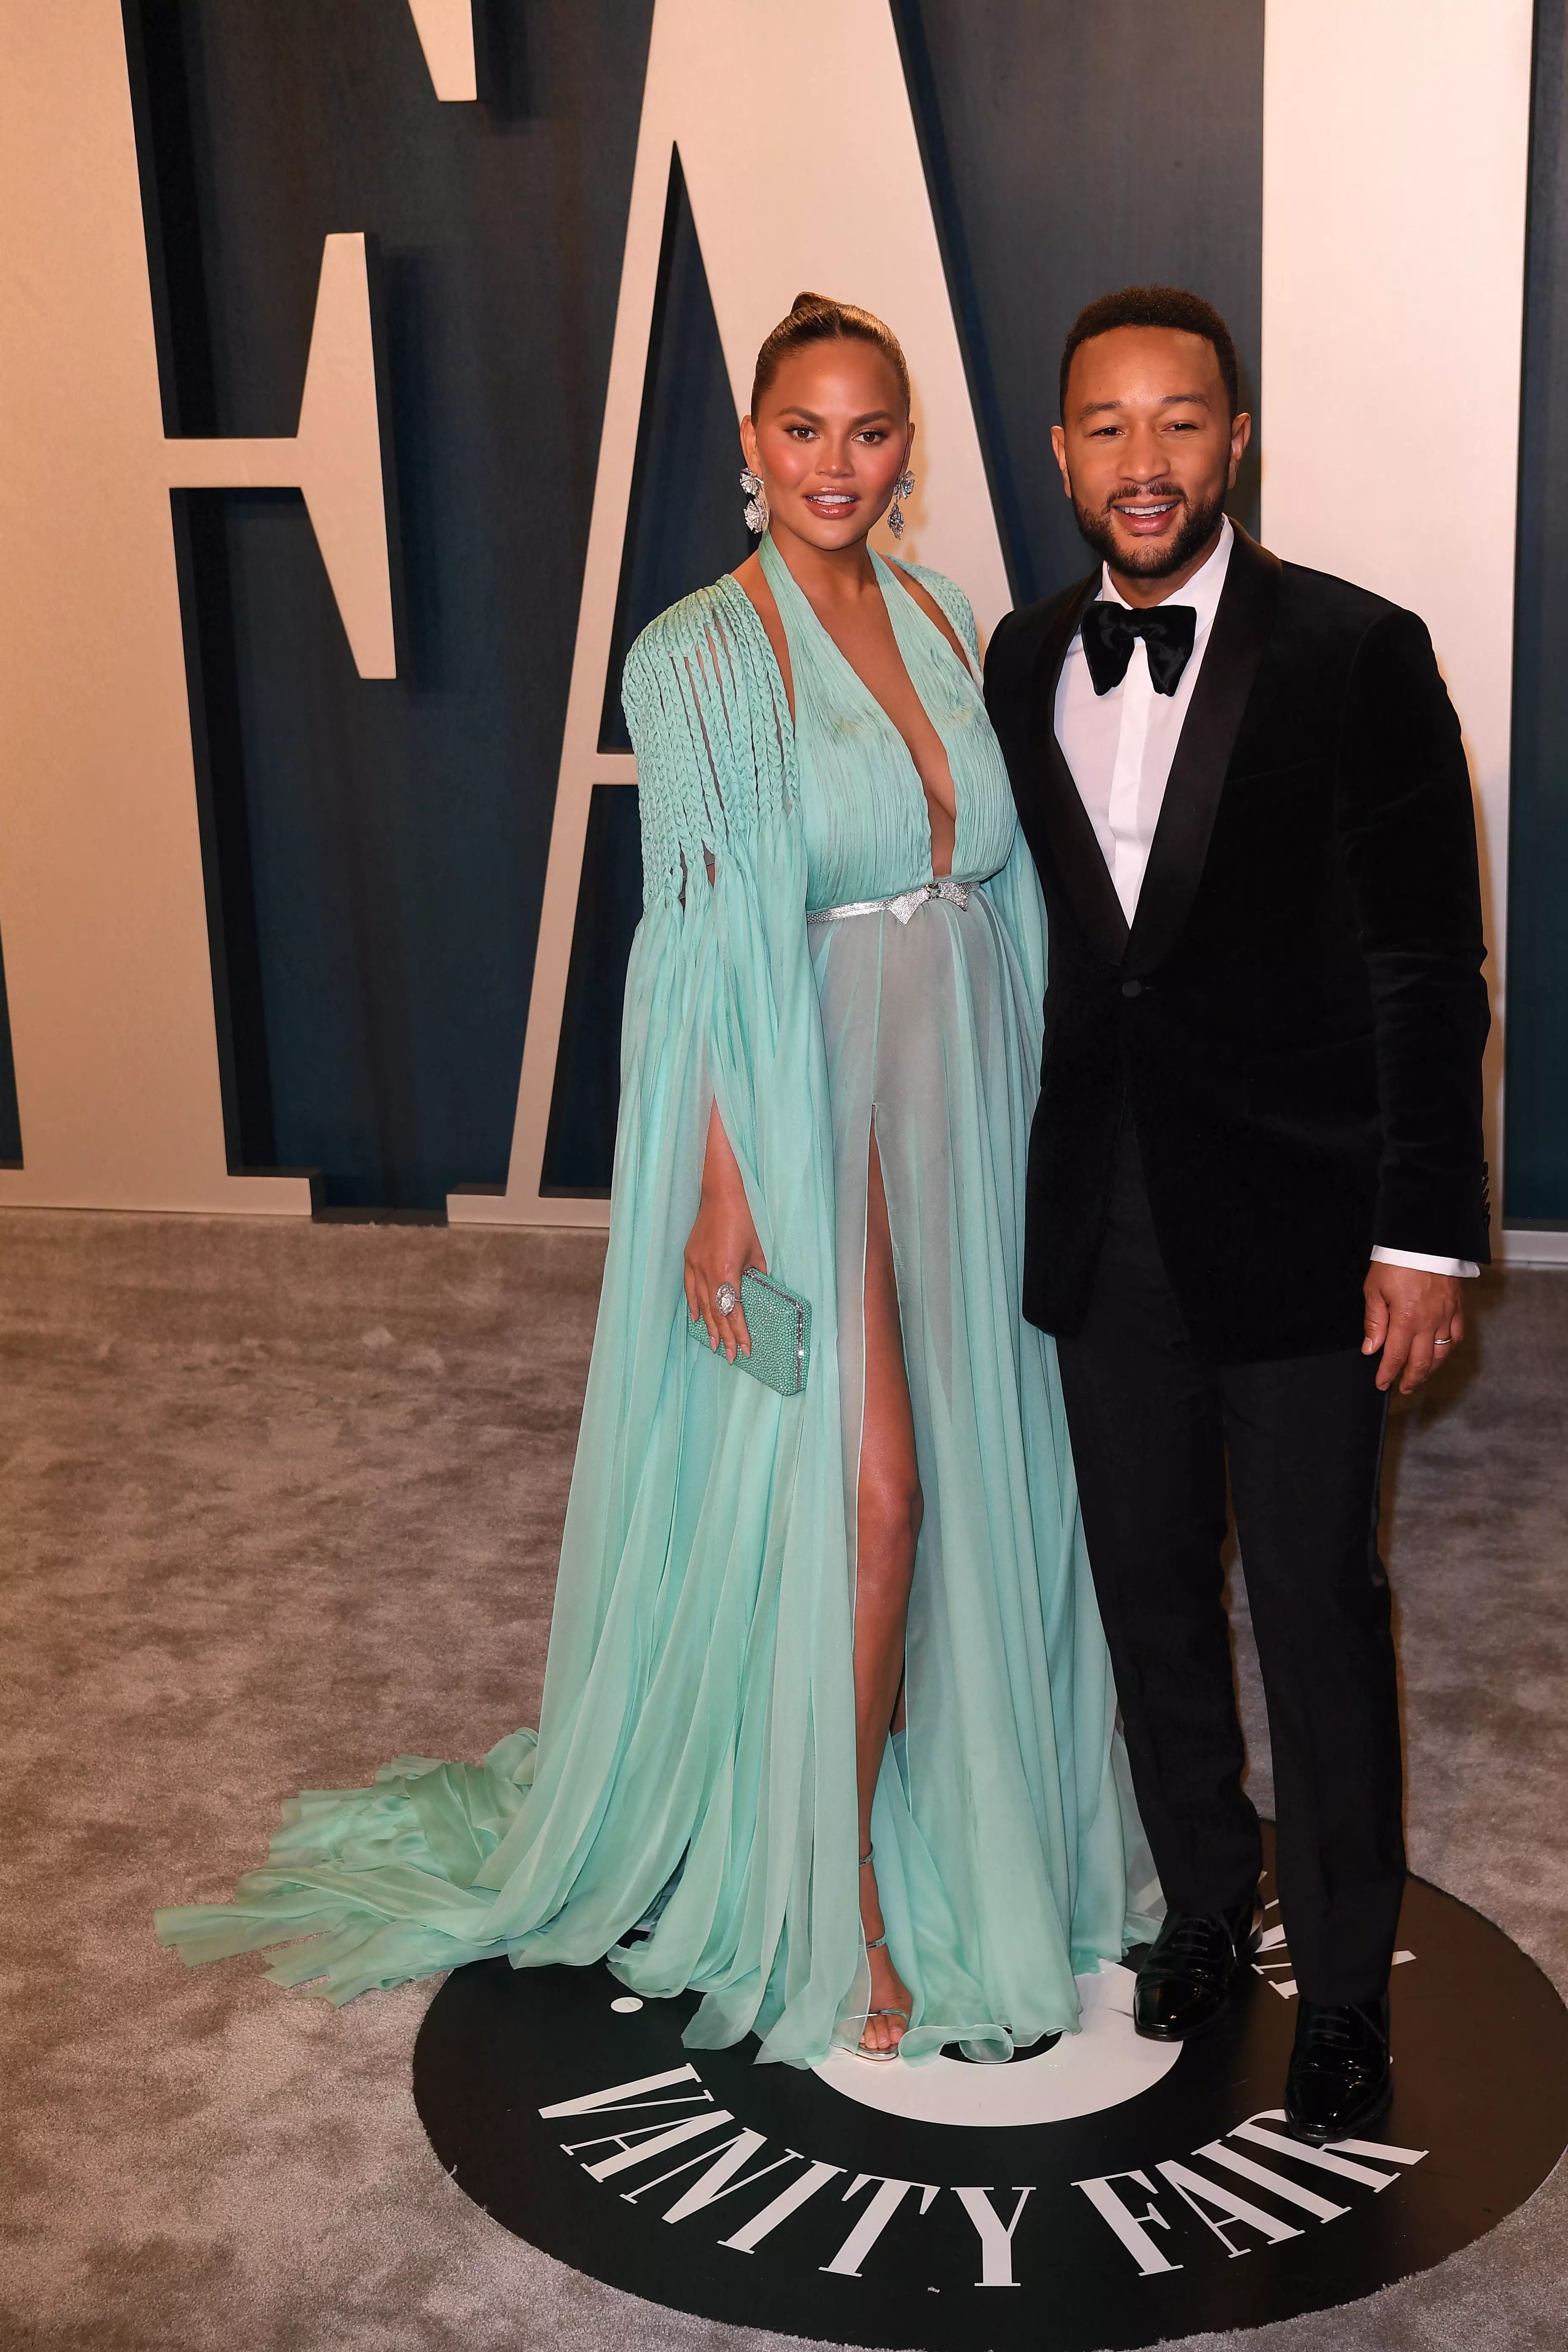 Chrissy and husband John Legend are set to welcome their third child.